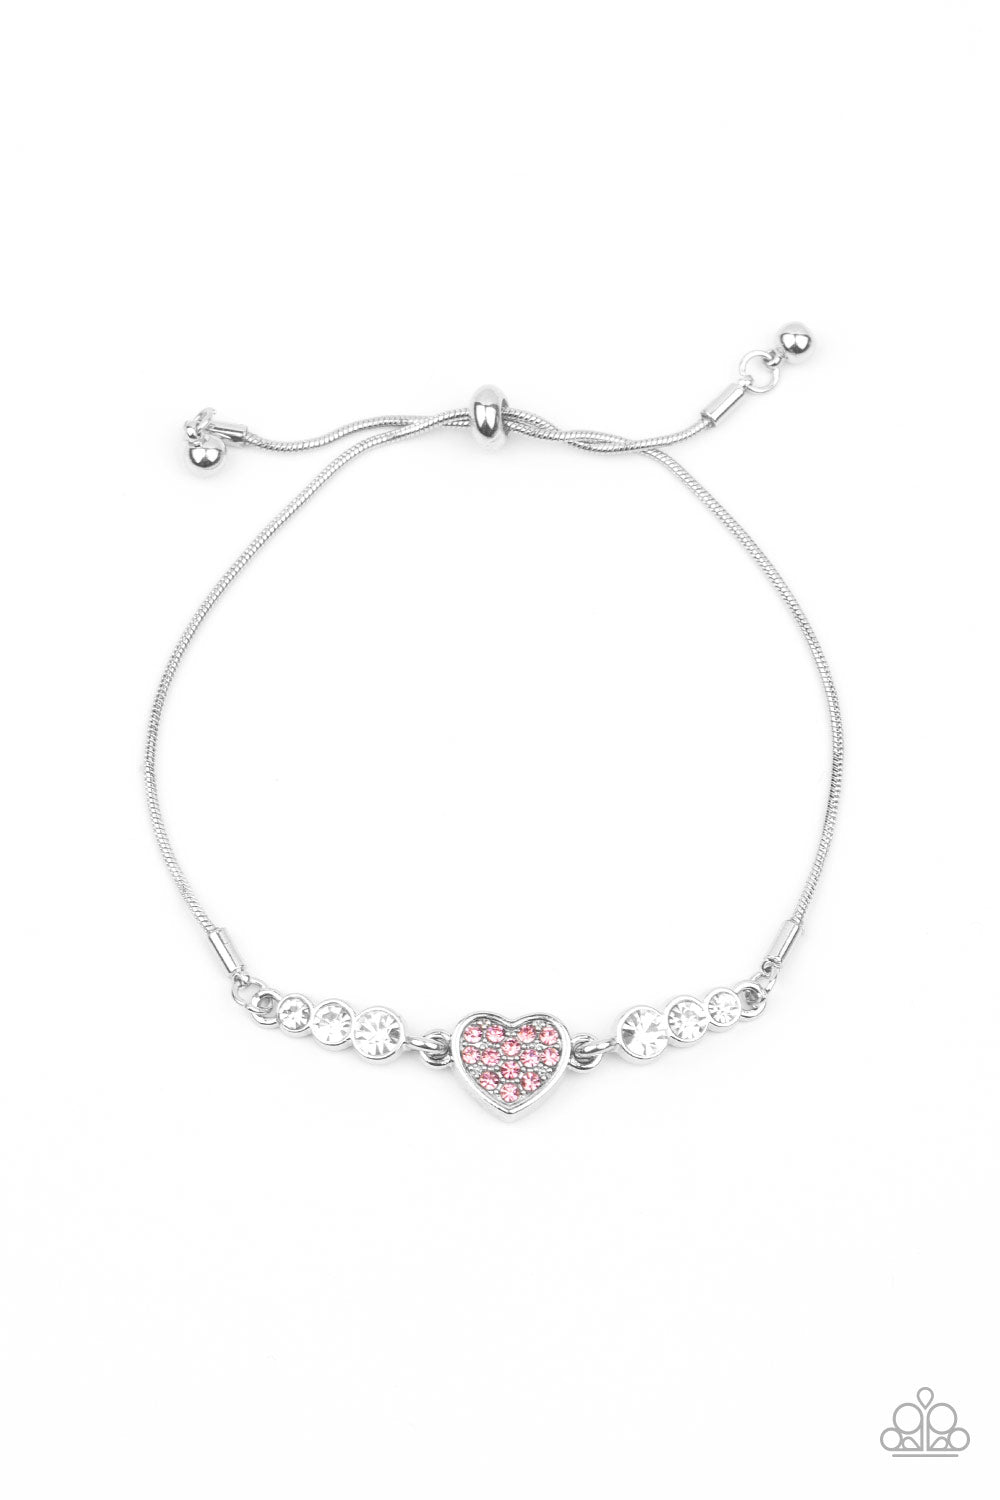 Paparazzi Big-Hearted Beam Bracelet - January 2021 Life Of The Party Exclusive - A Finishing Touch 